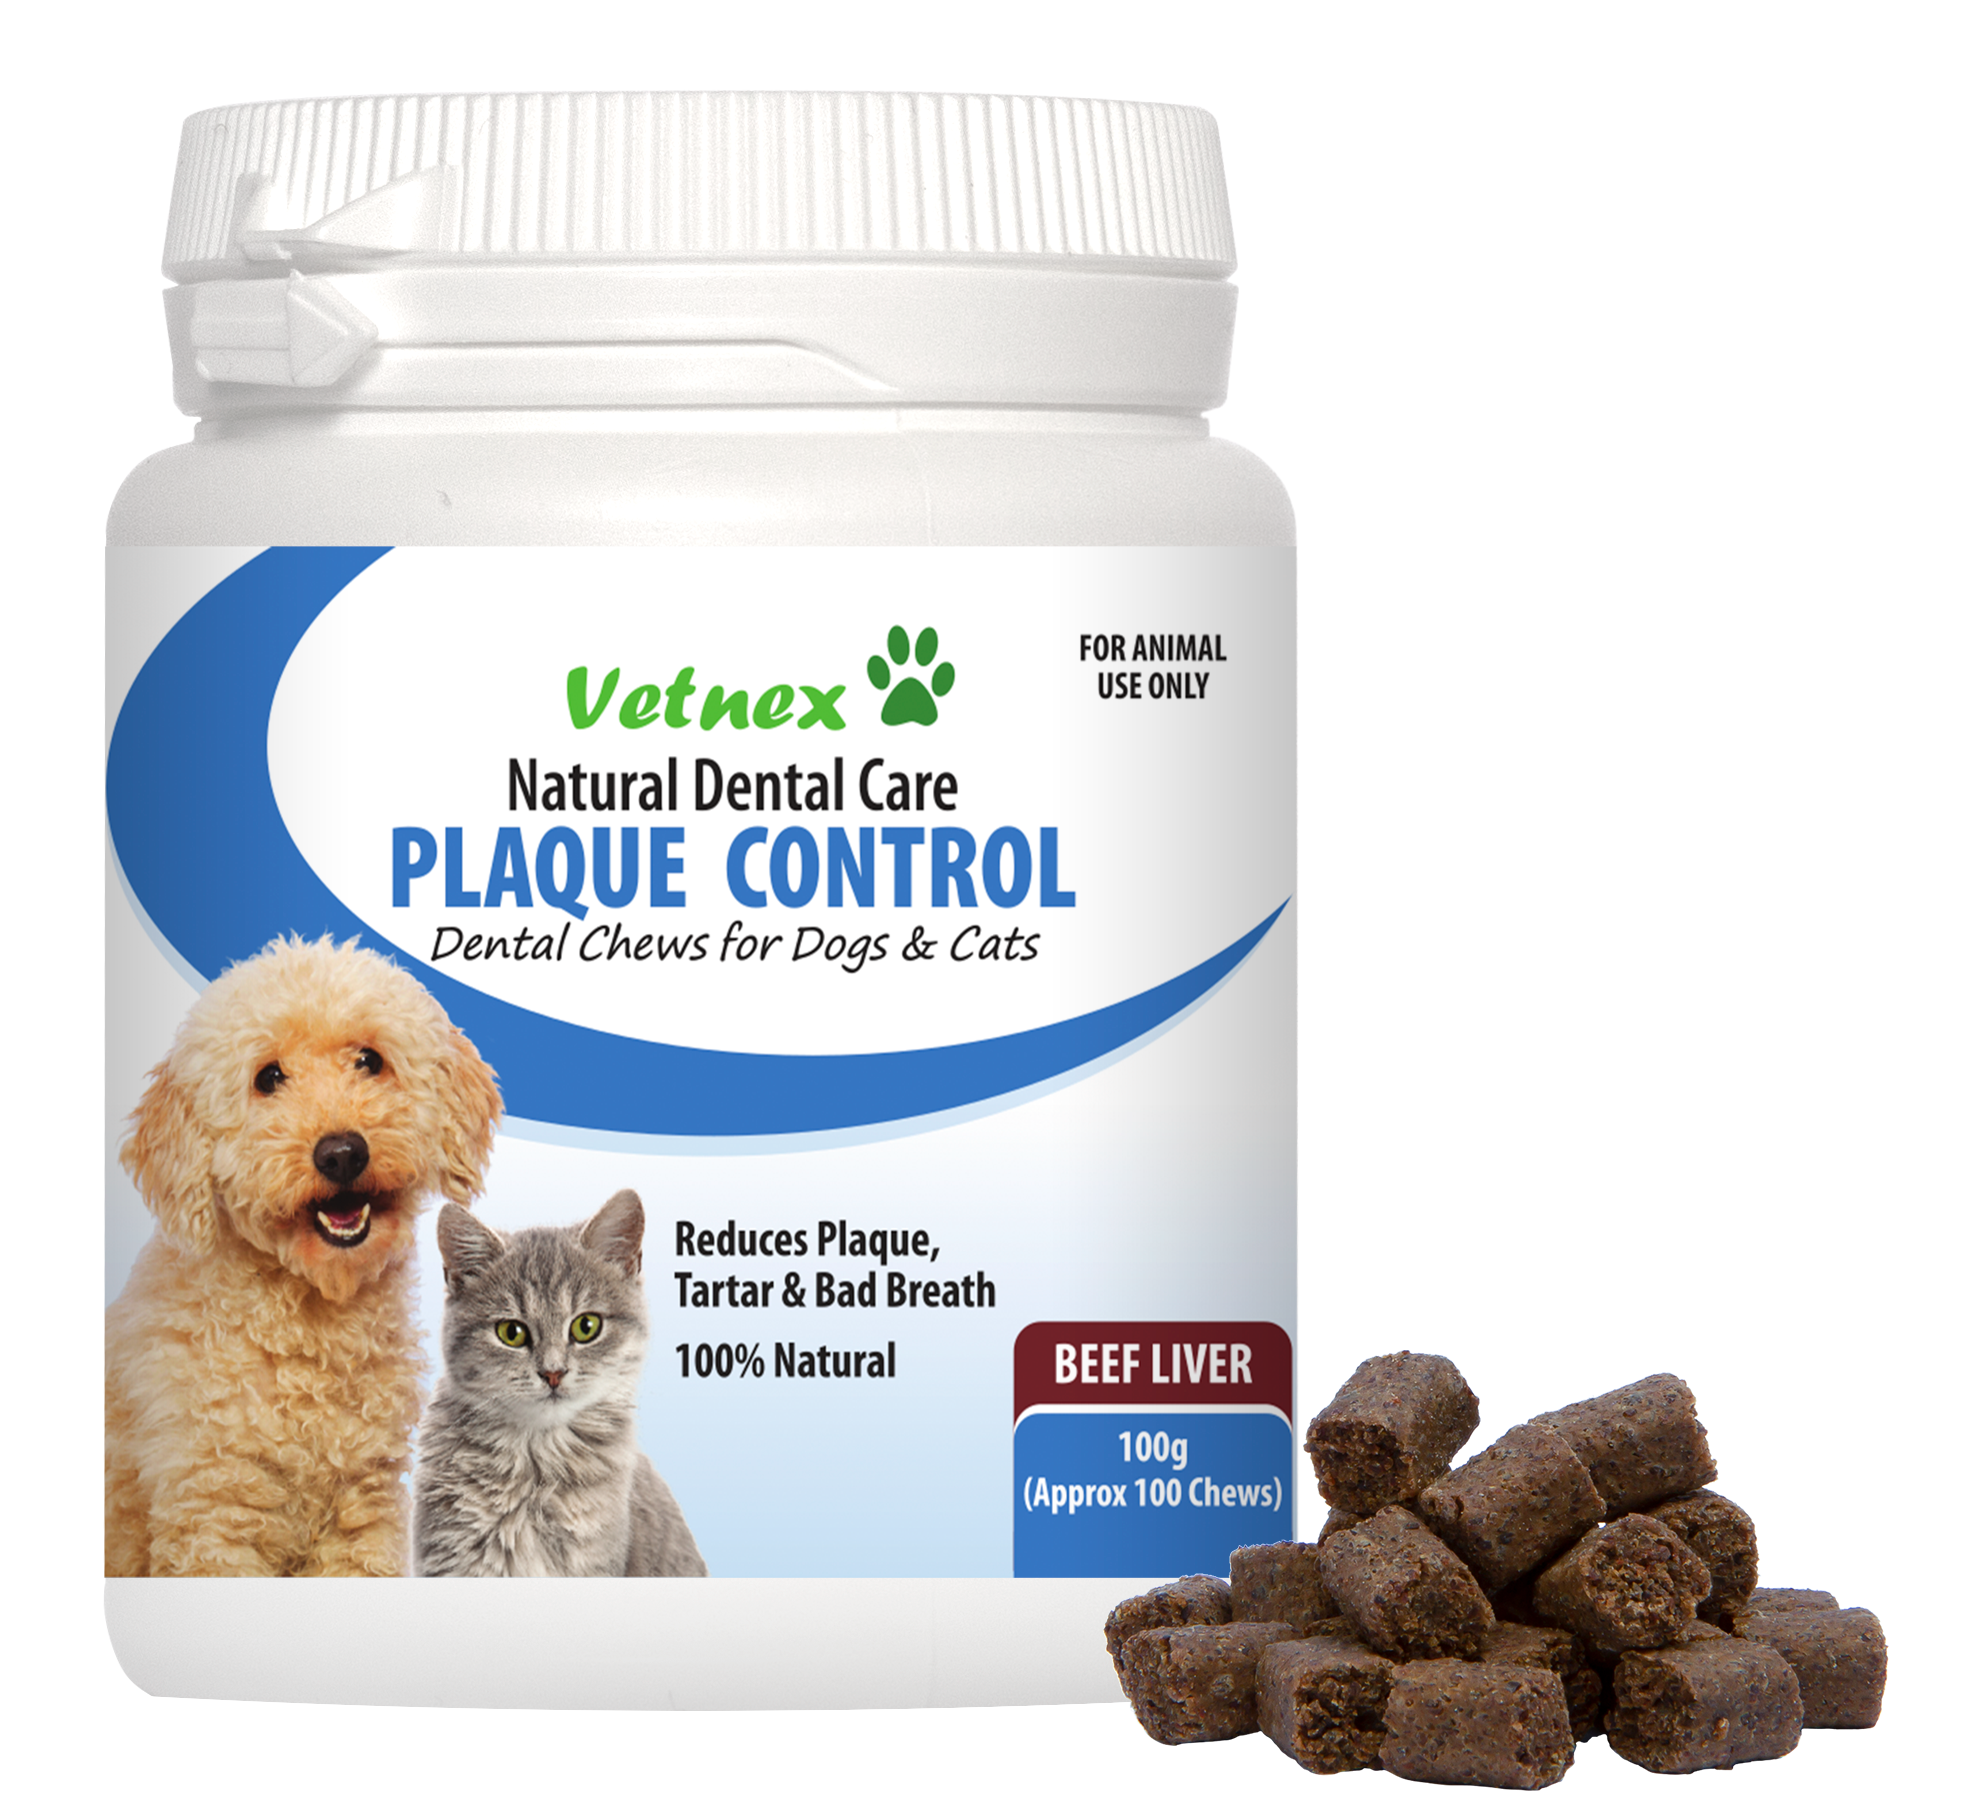 Vetnex Plaque Control Dental Chews (Beef Liver) for Dogs & Cats 100g/100 chews